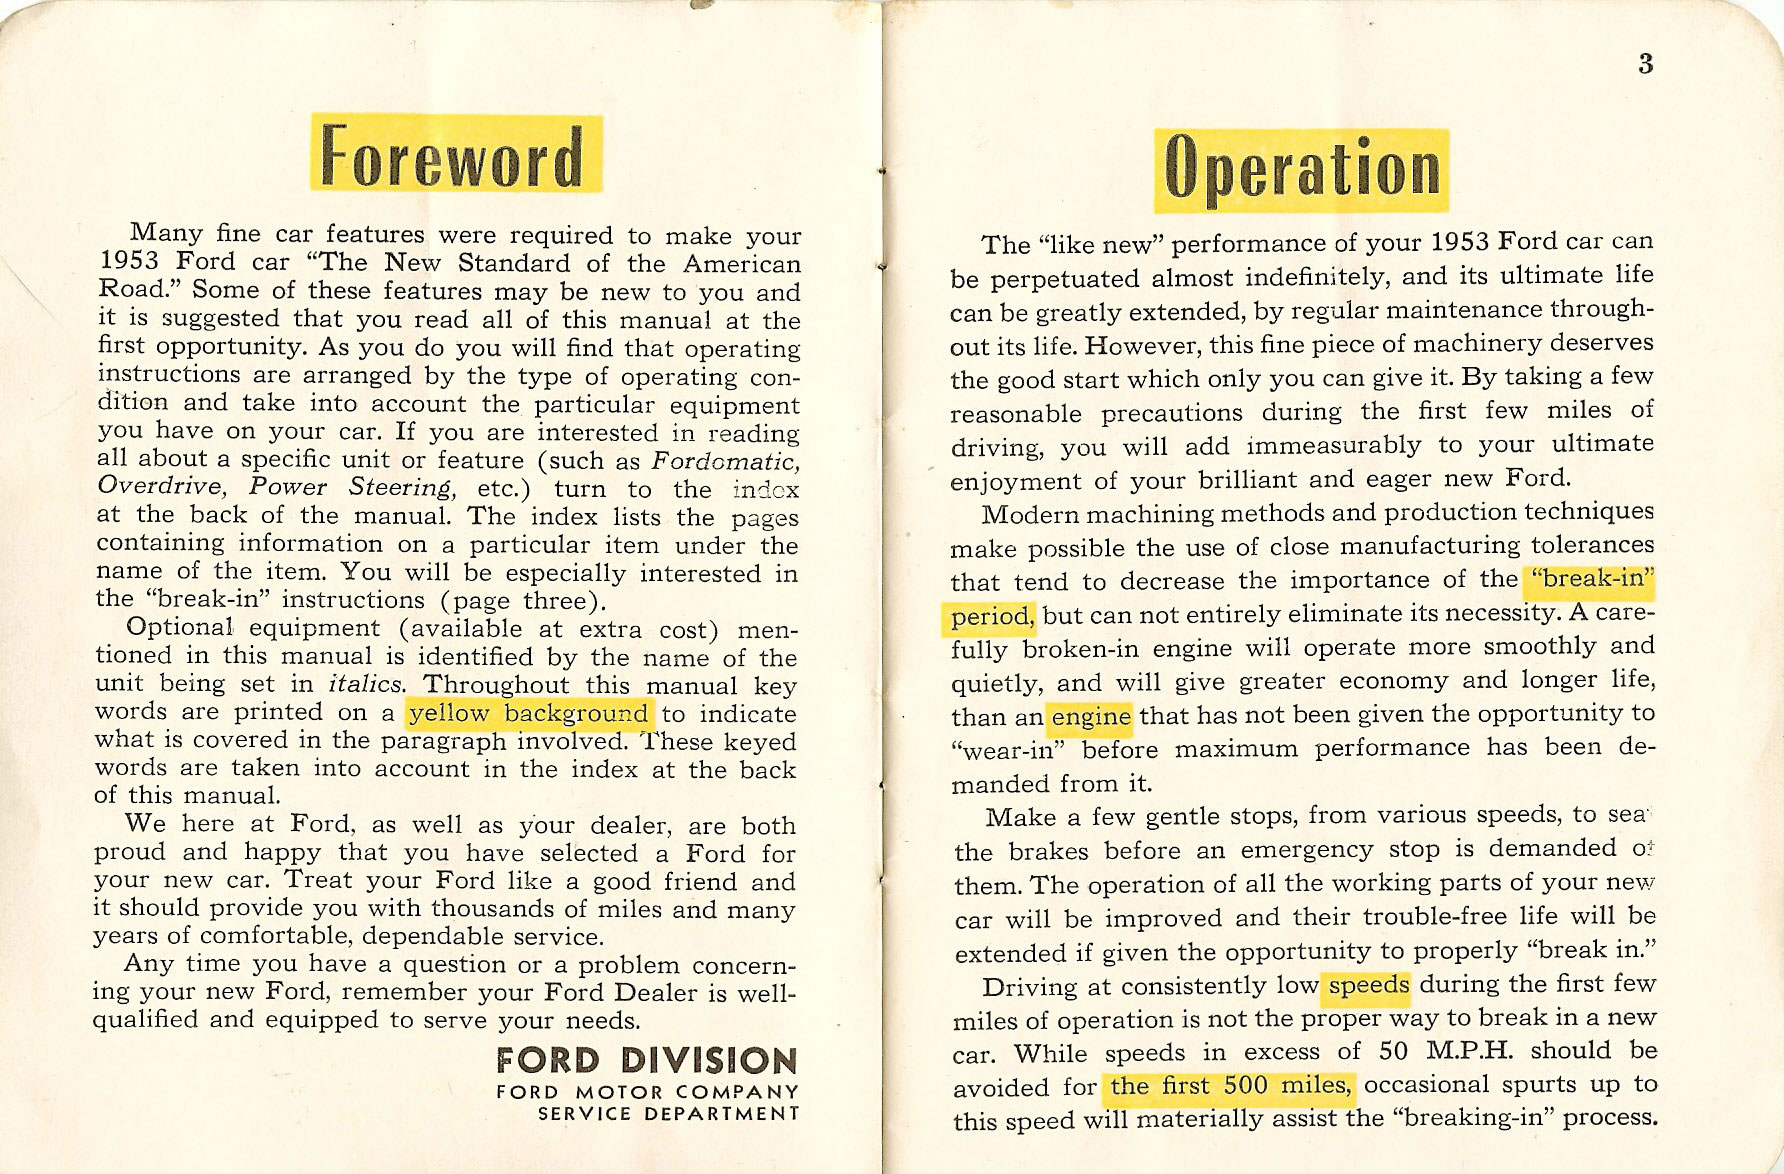 1953 Ford Owners Manual-02 amp 03